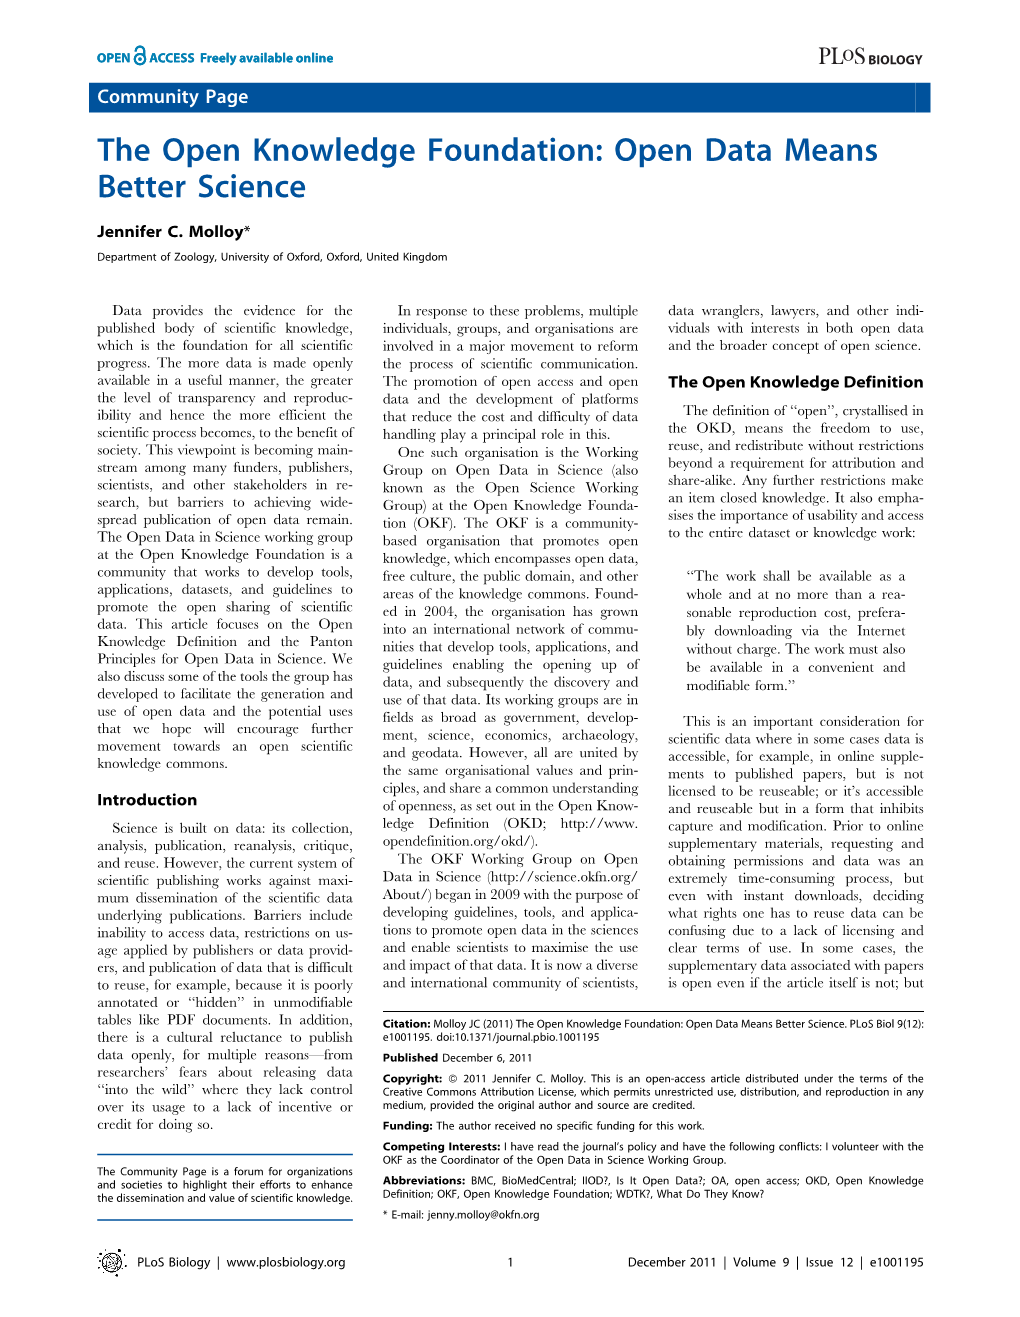 The Open Knowledge Foundation: Open Data Means Better Science